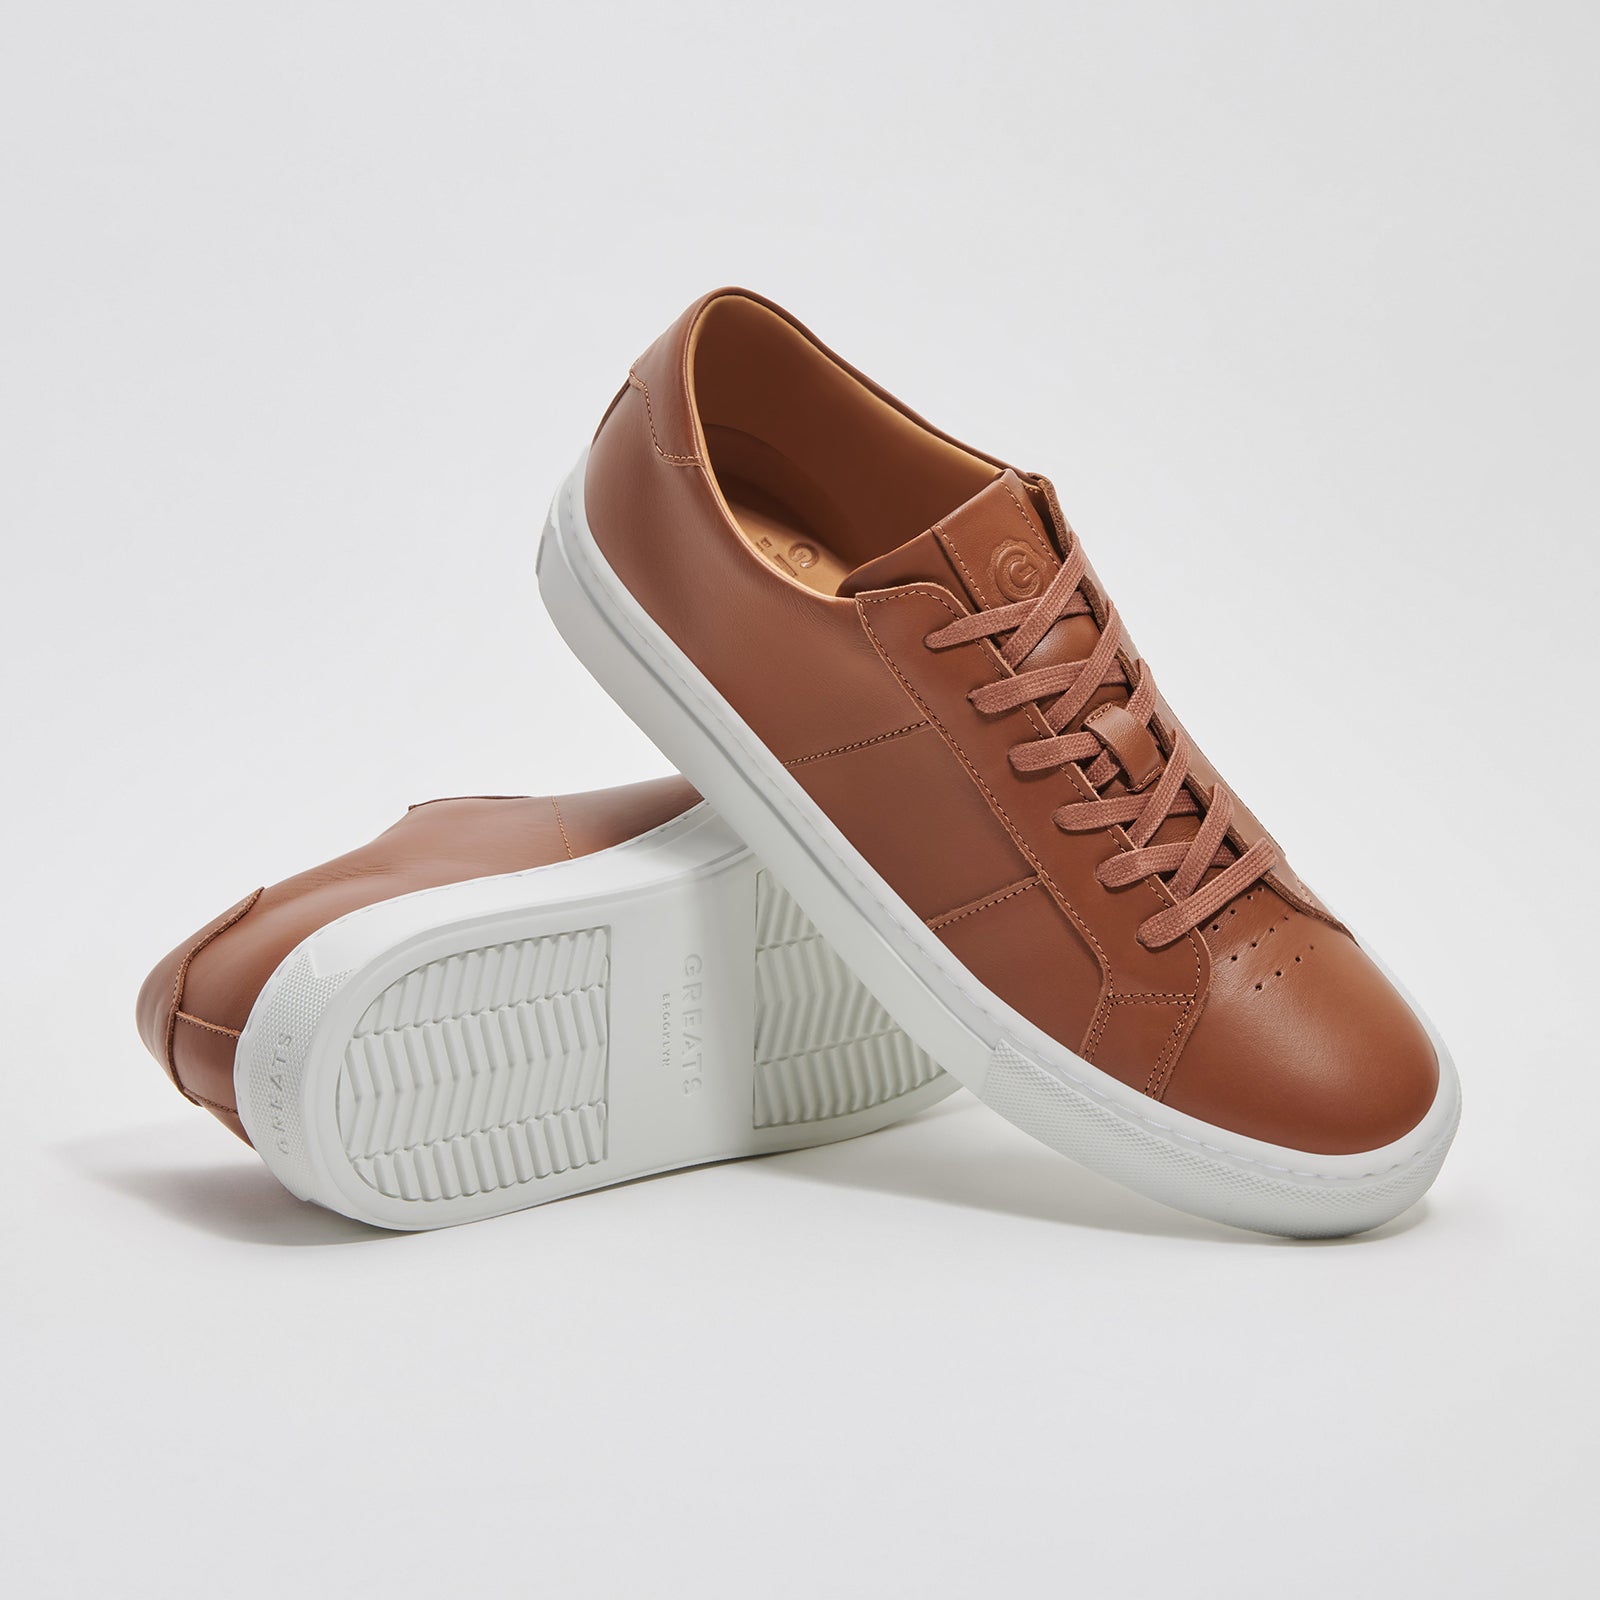 GREATS - The Royale High - Cuoio Leather - Men's Shoe